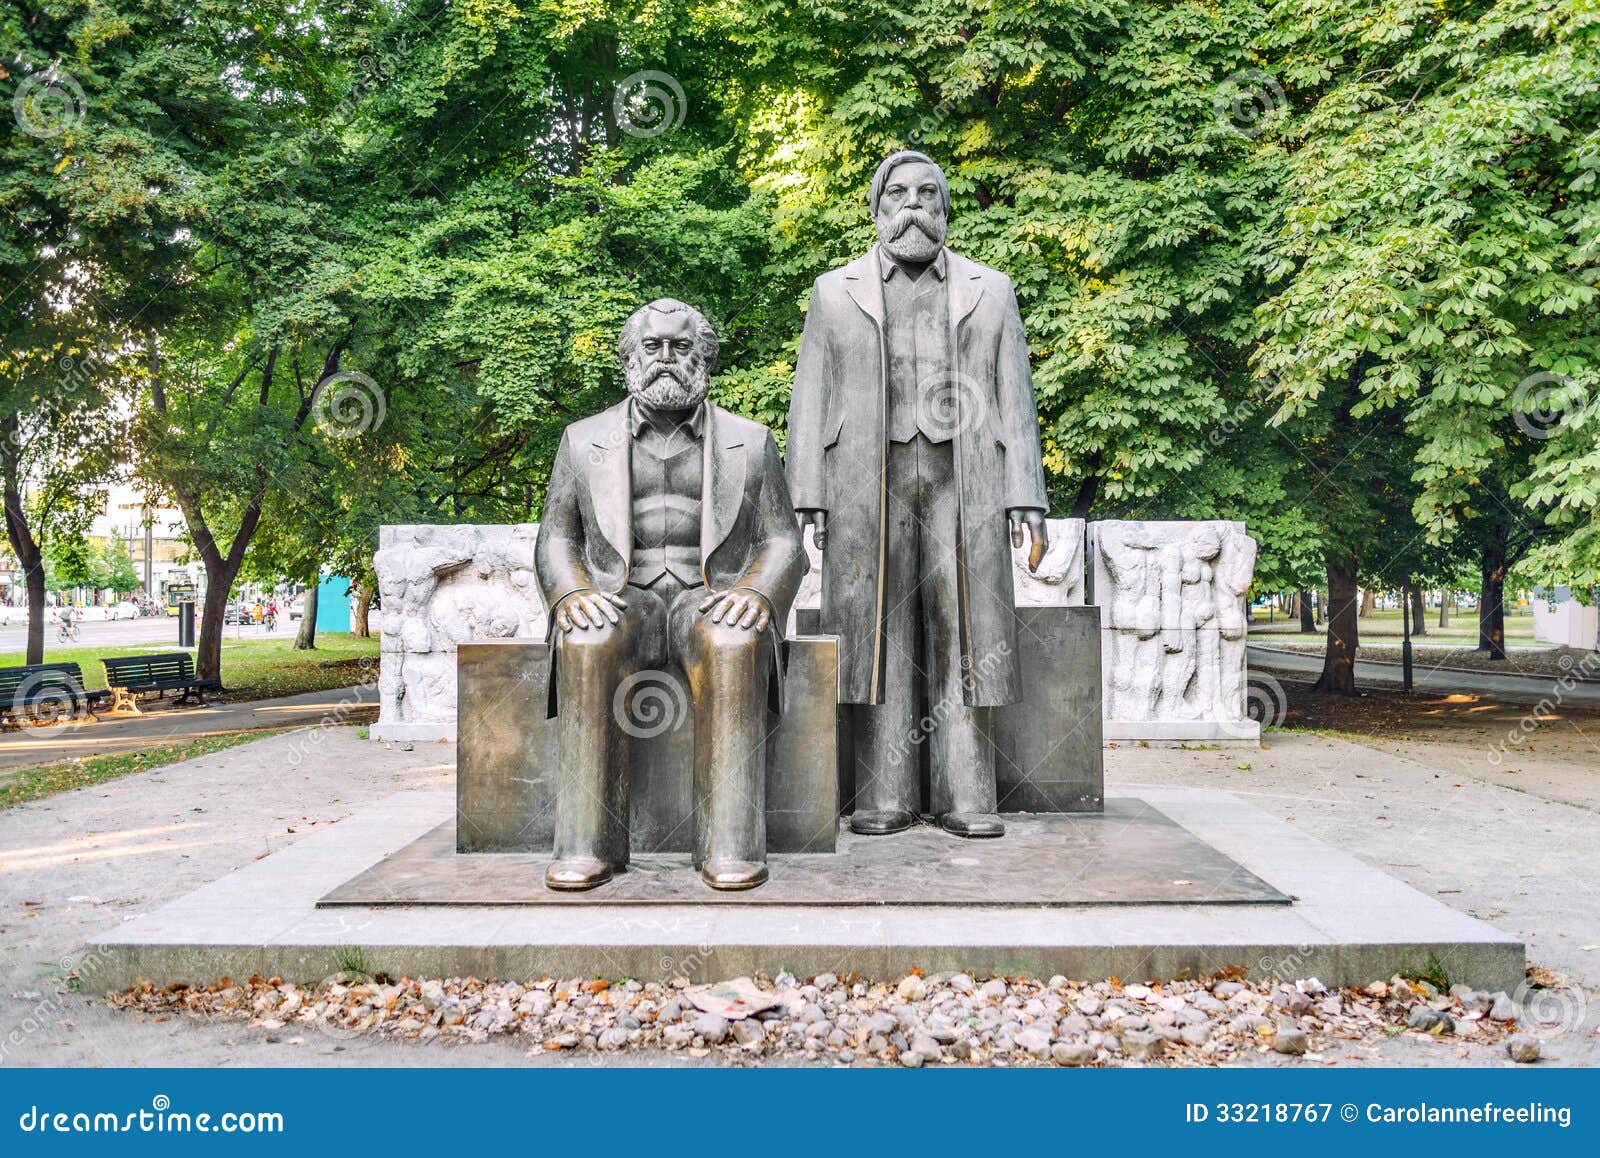 marx and engels statues